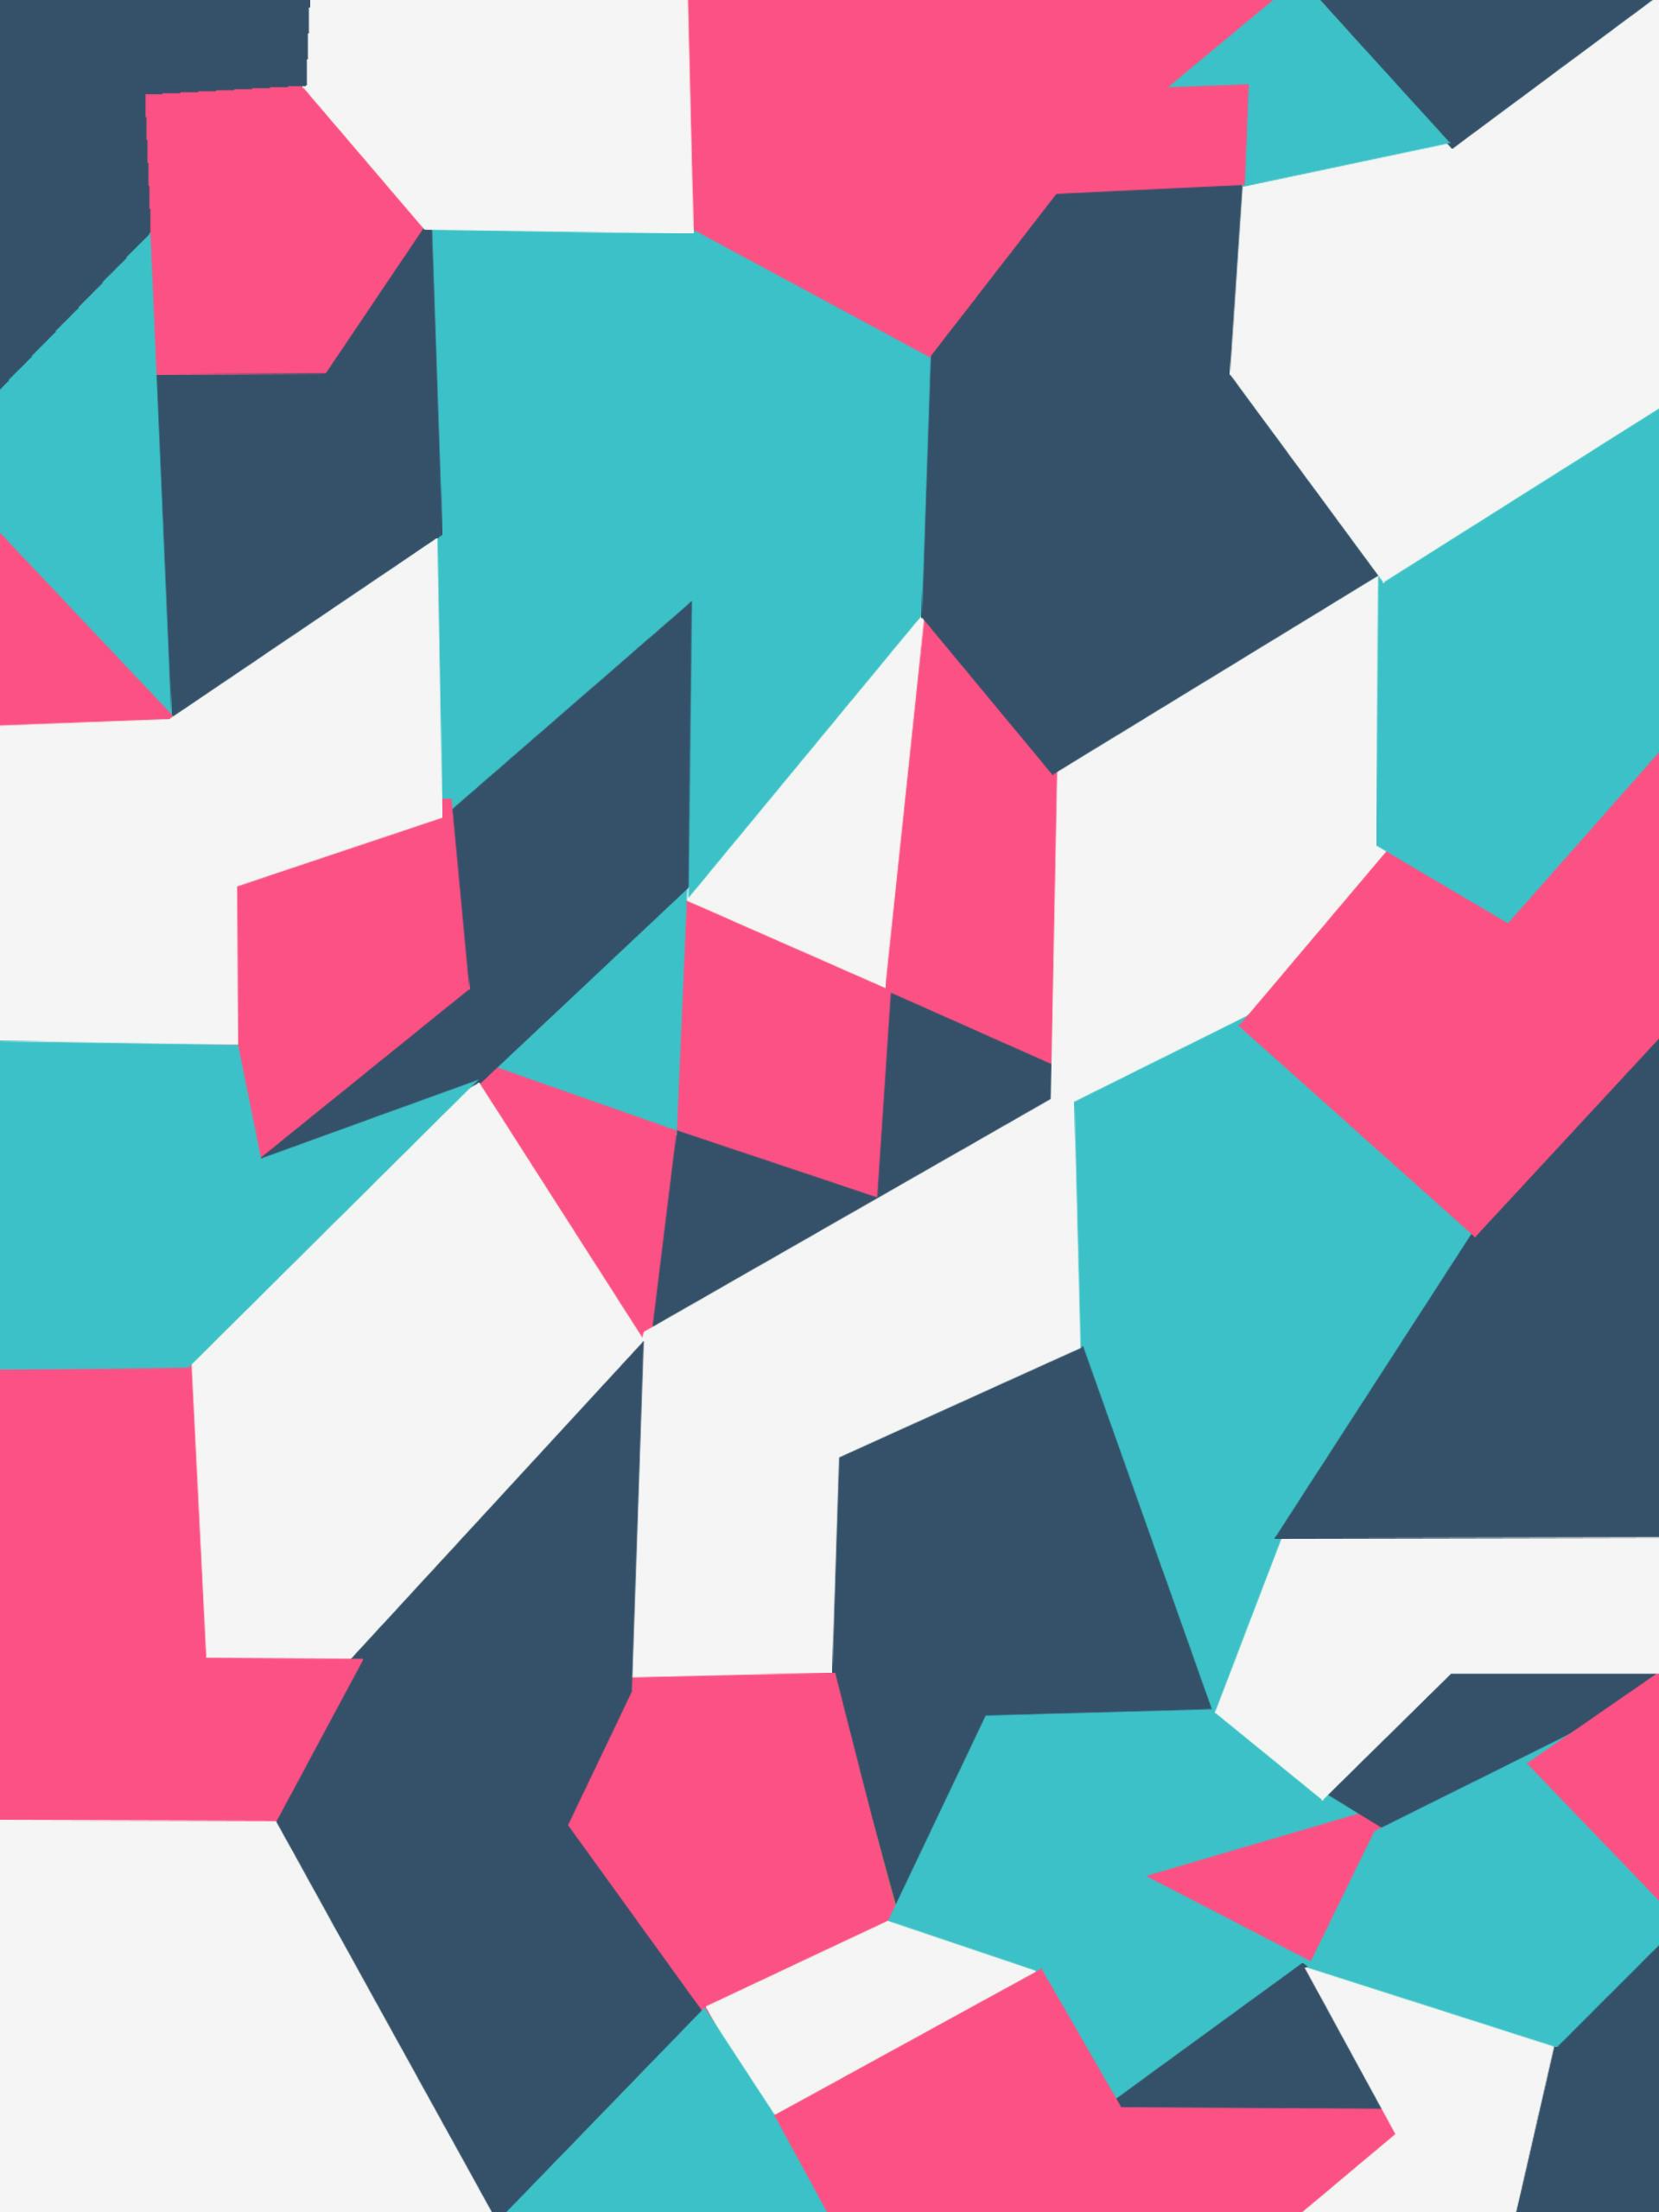 Free stock photo  of graphic  design  pattern